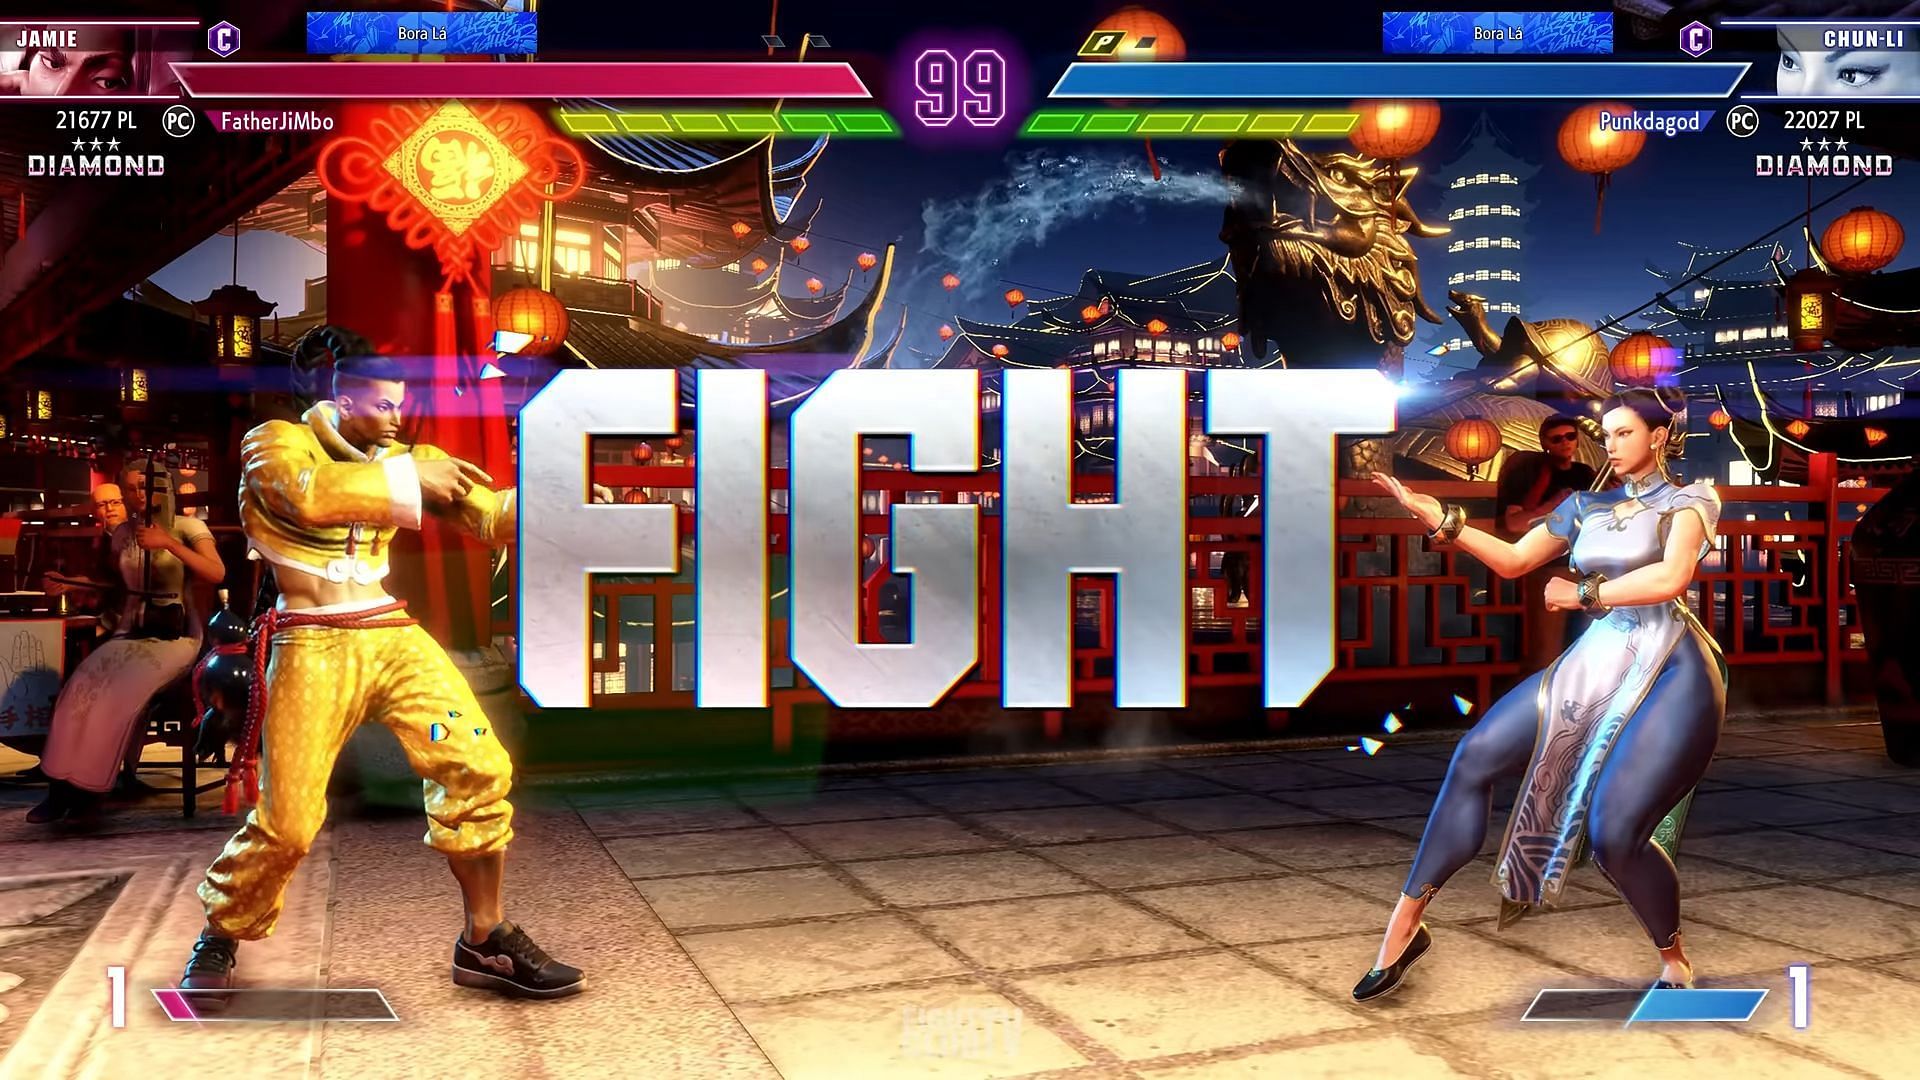 Performing combos and EX moves is crucial to winning battles in Street Fighter 6 (Image via YouTube/FightClubTV)